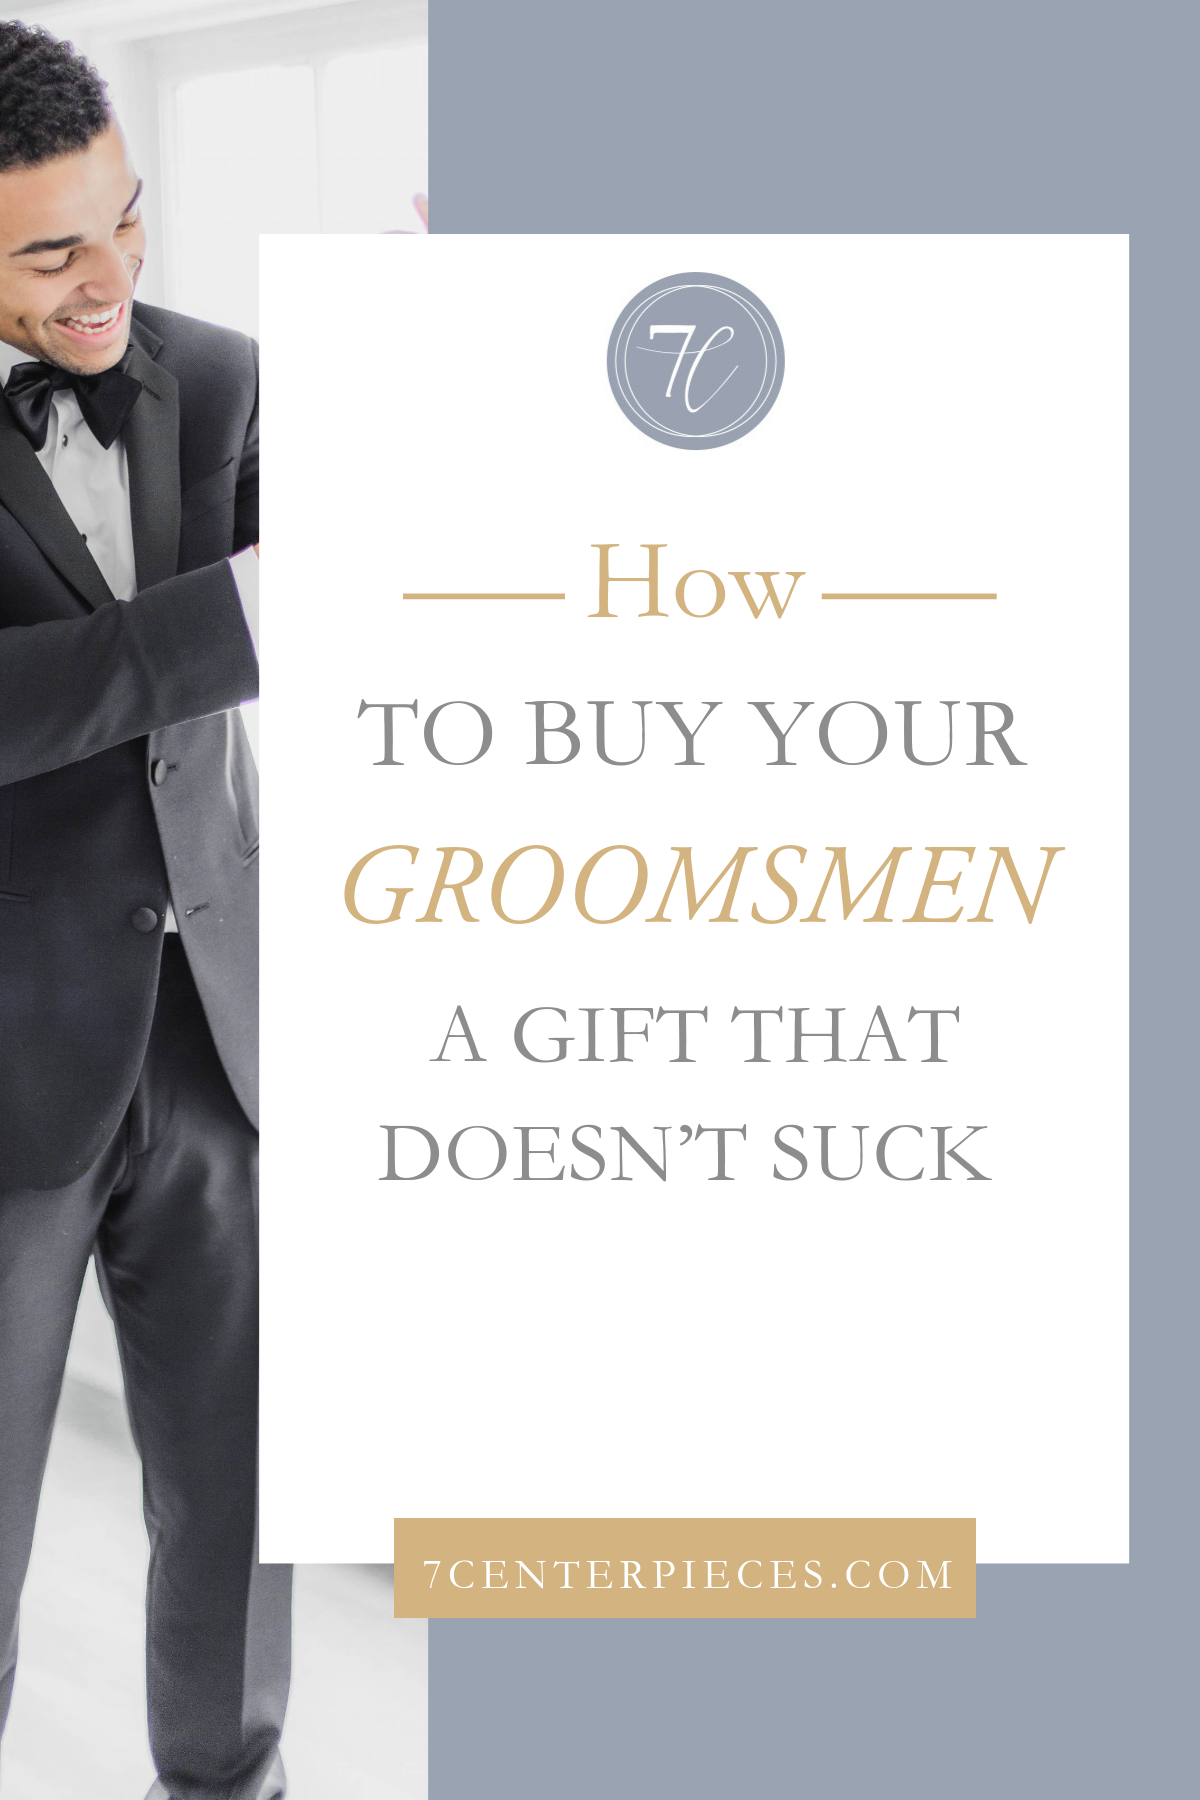 How to Buy Your Groomsmen a Gift that Doesn't Suck